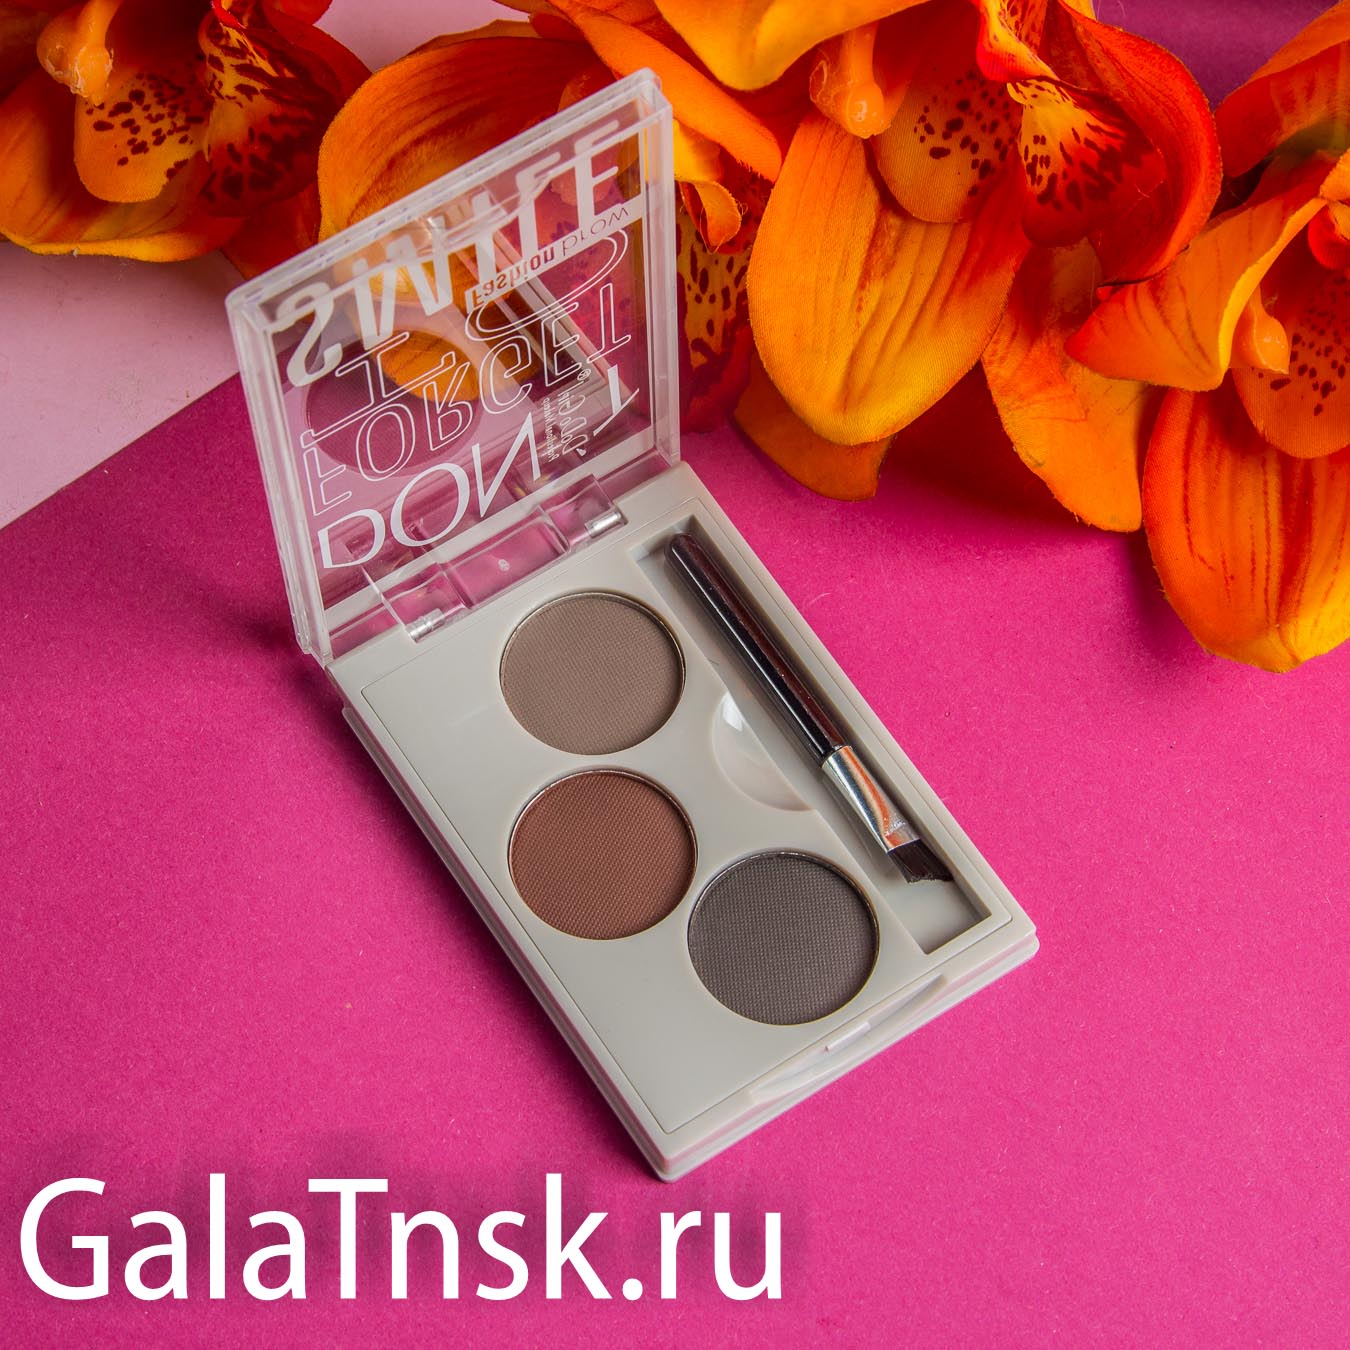 DO DO GIPL Тени для бровей 3colors DON`T FORGET TO SMILE BP022 03